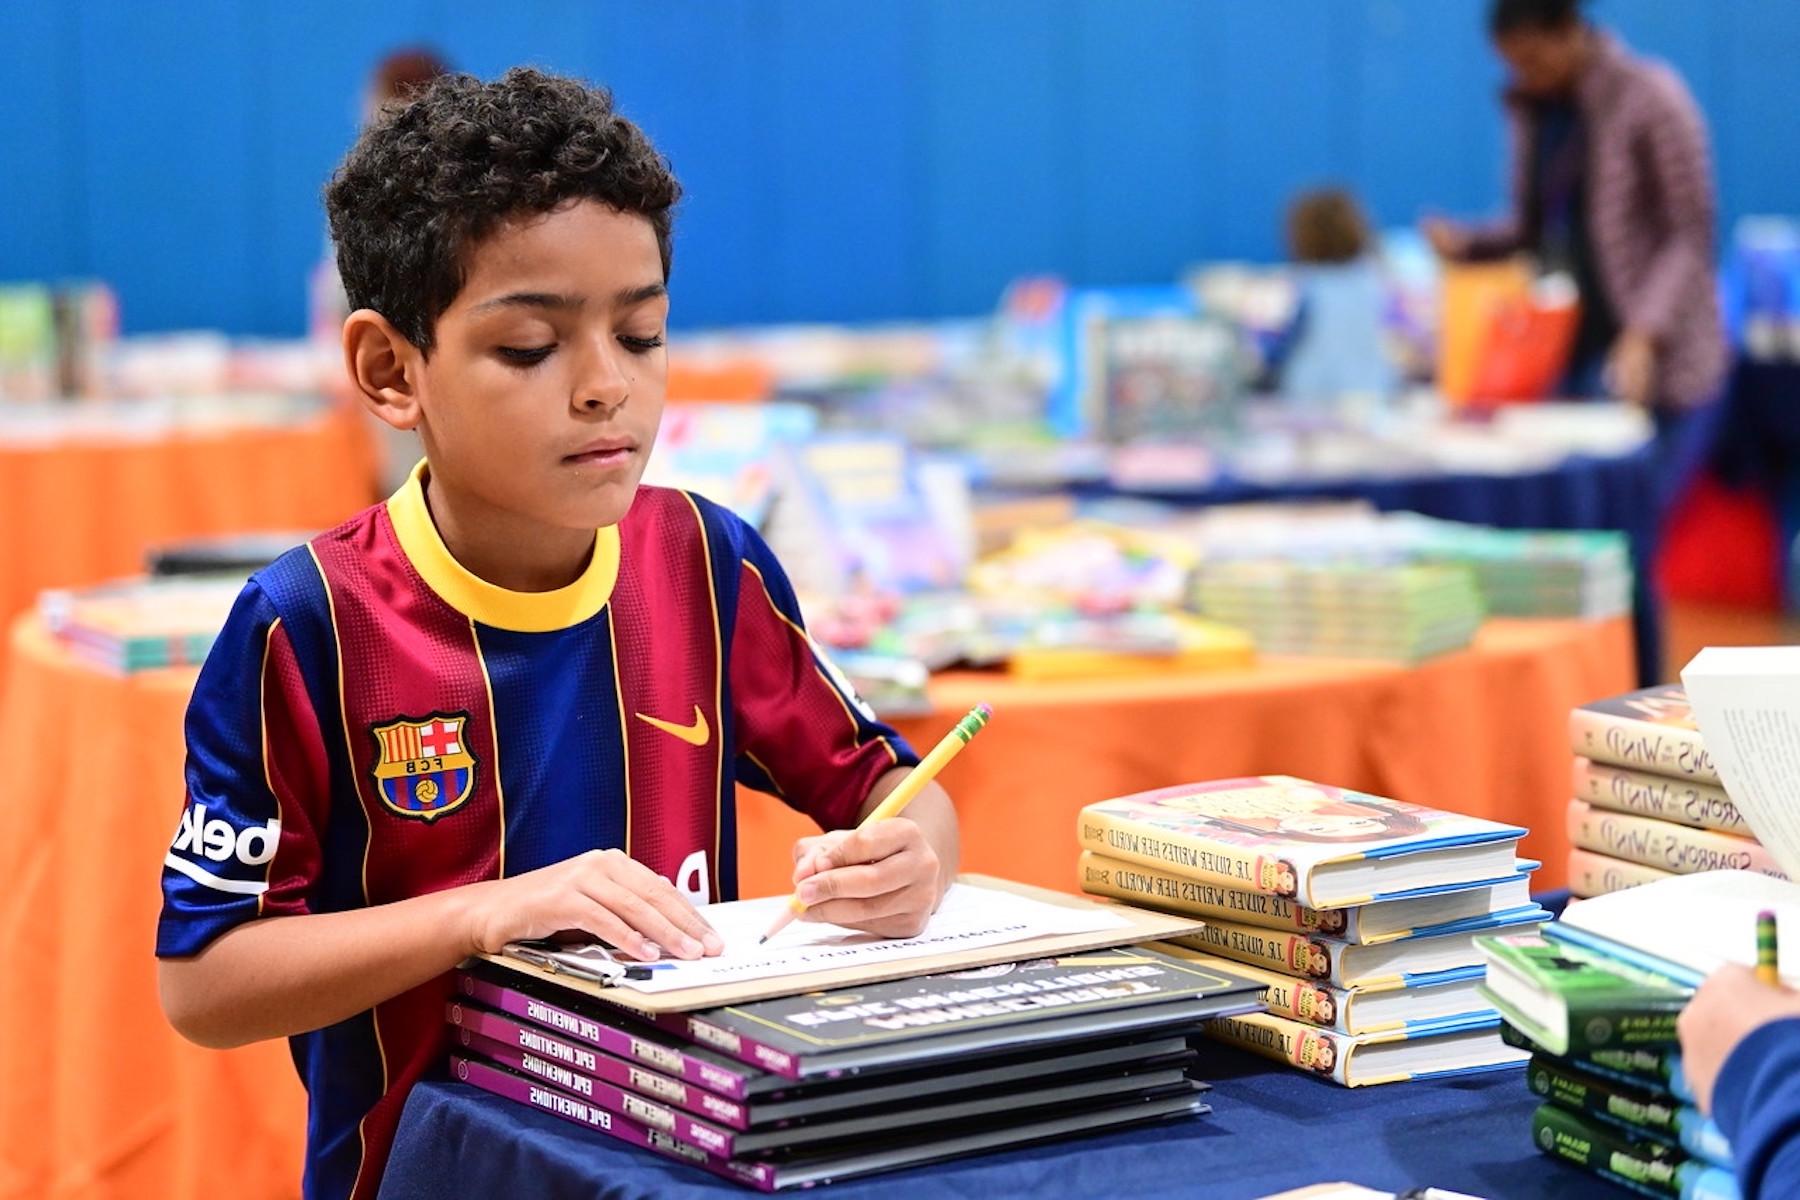 Fieldston Lower students writes down the name of a book using a pencil at the book fair.